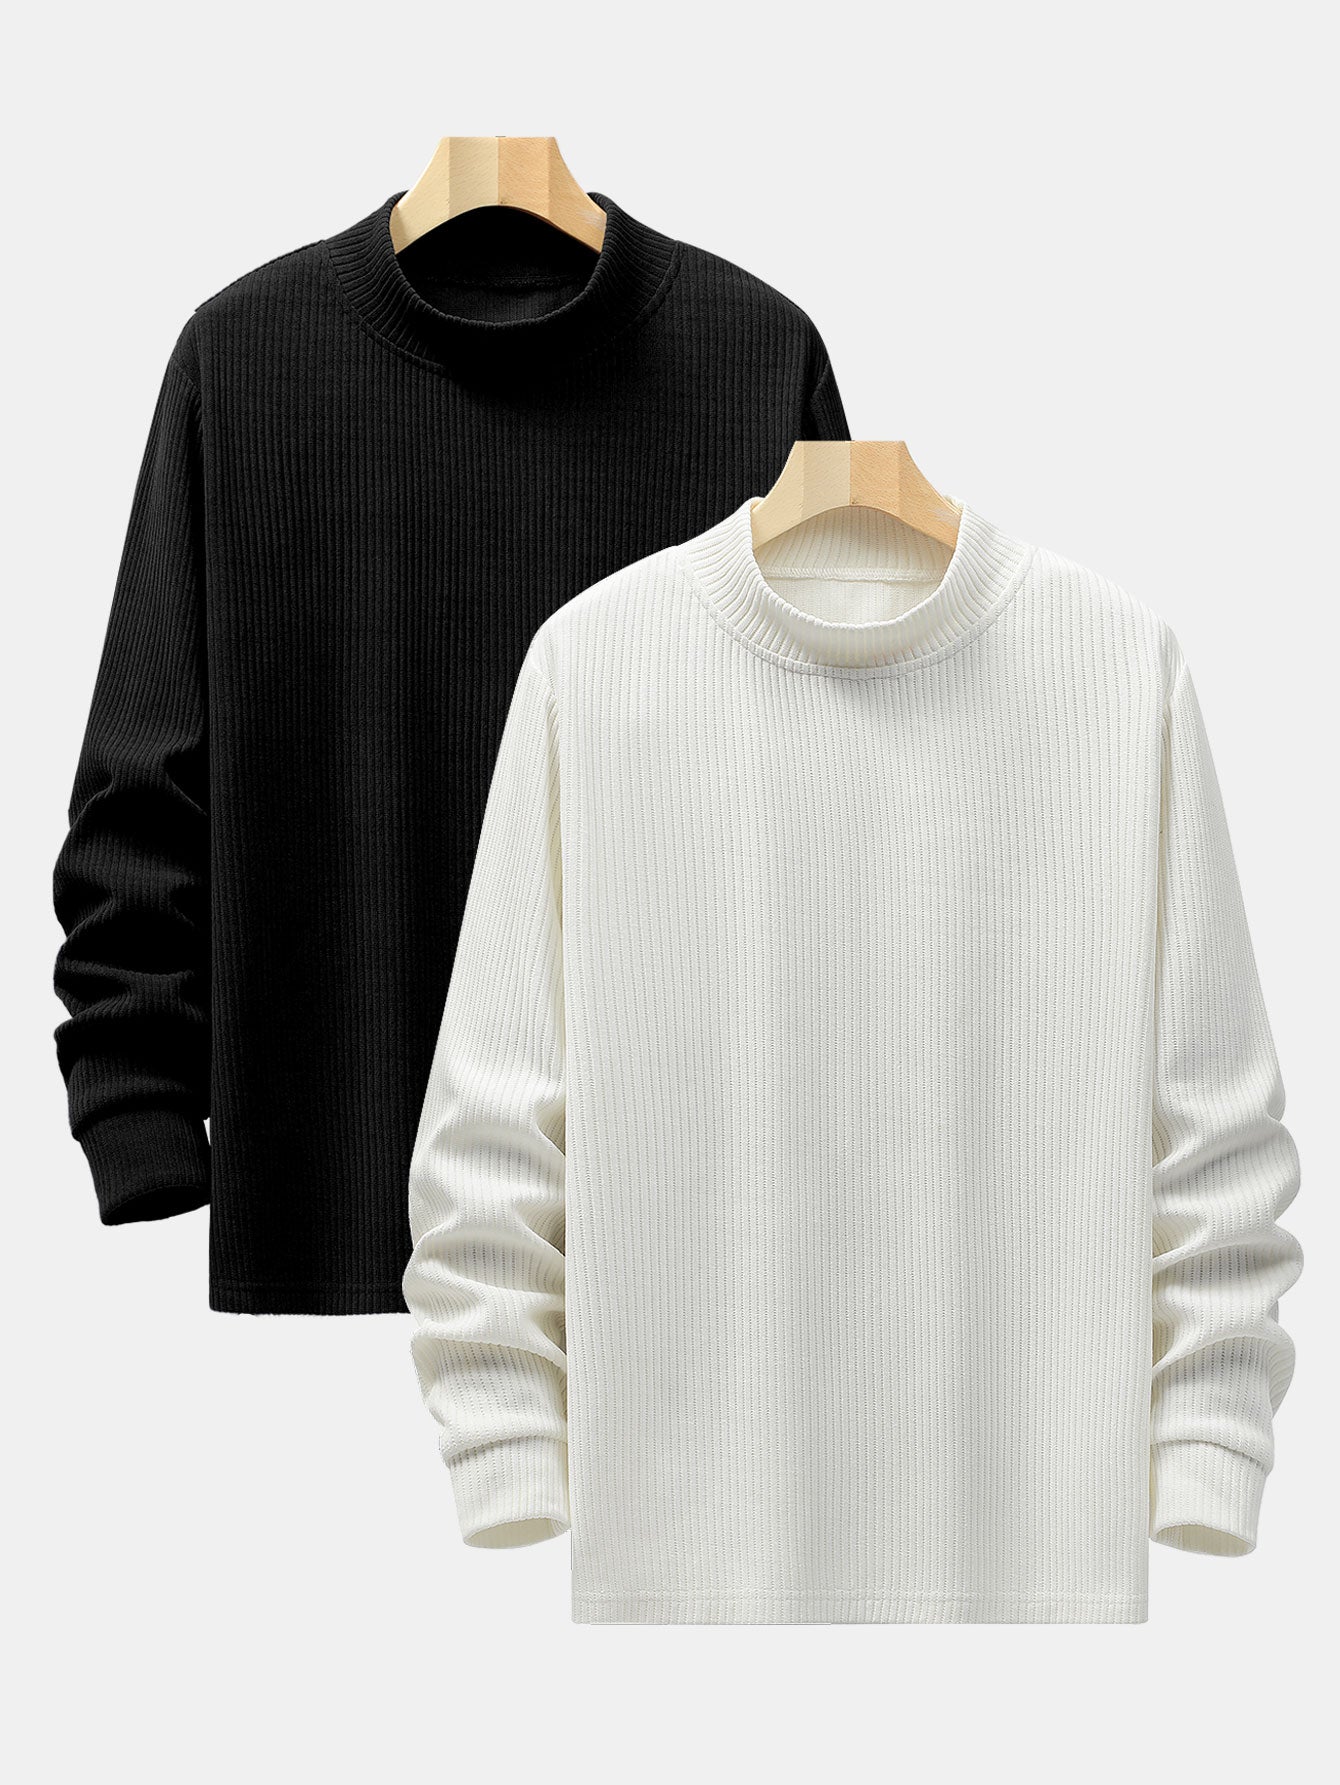 2 Pieces Long Sleeve Muscle Fit Knit Ribbed Mock Neck T-Shirts